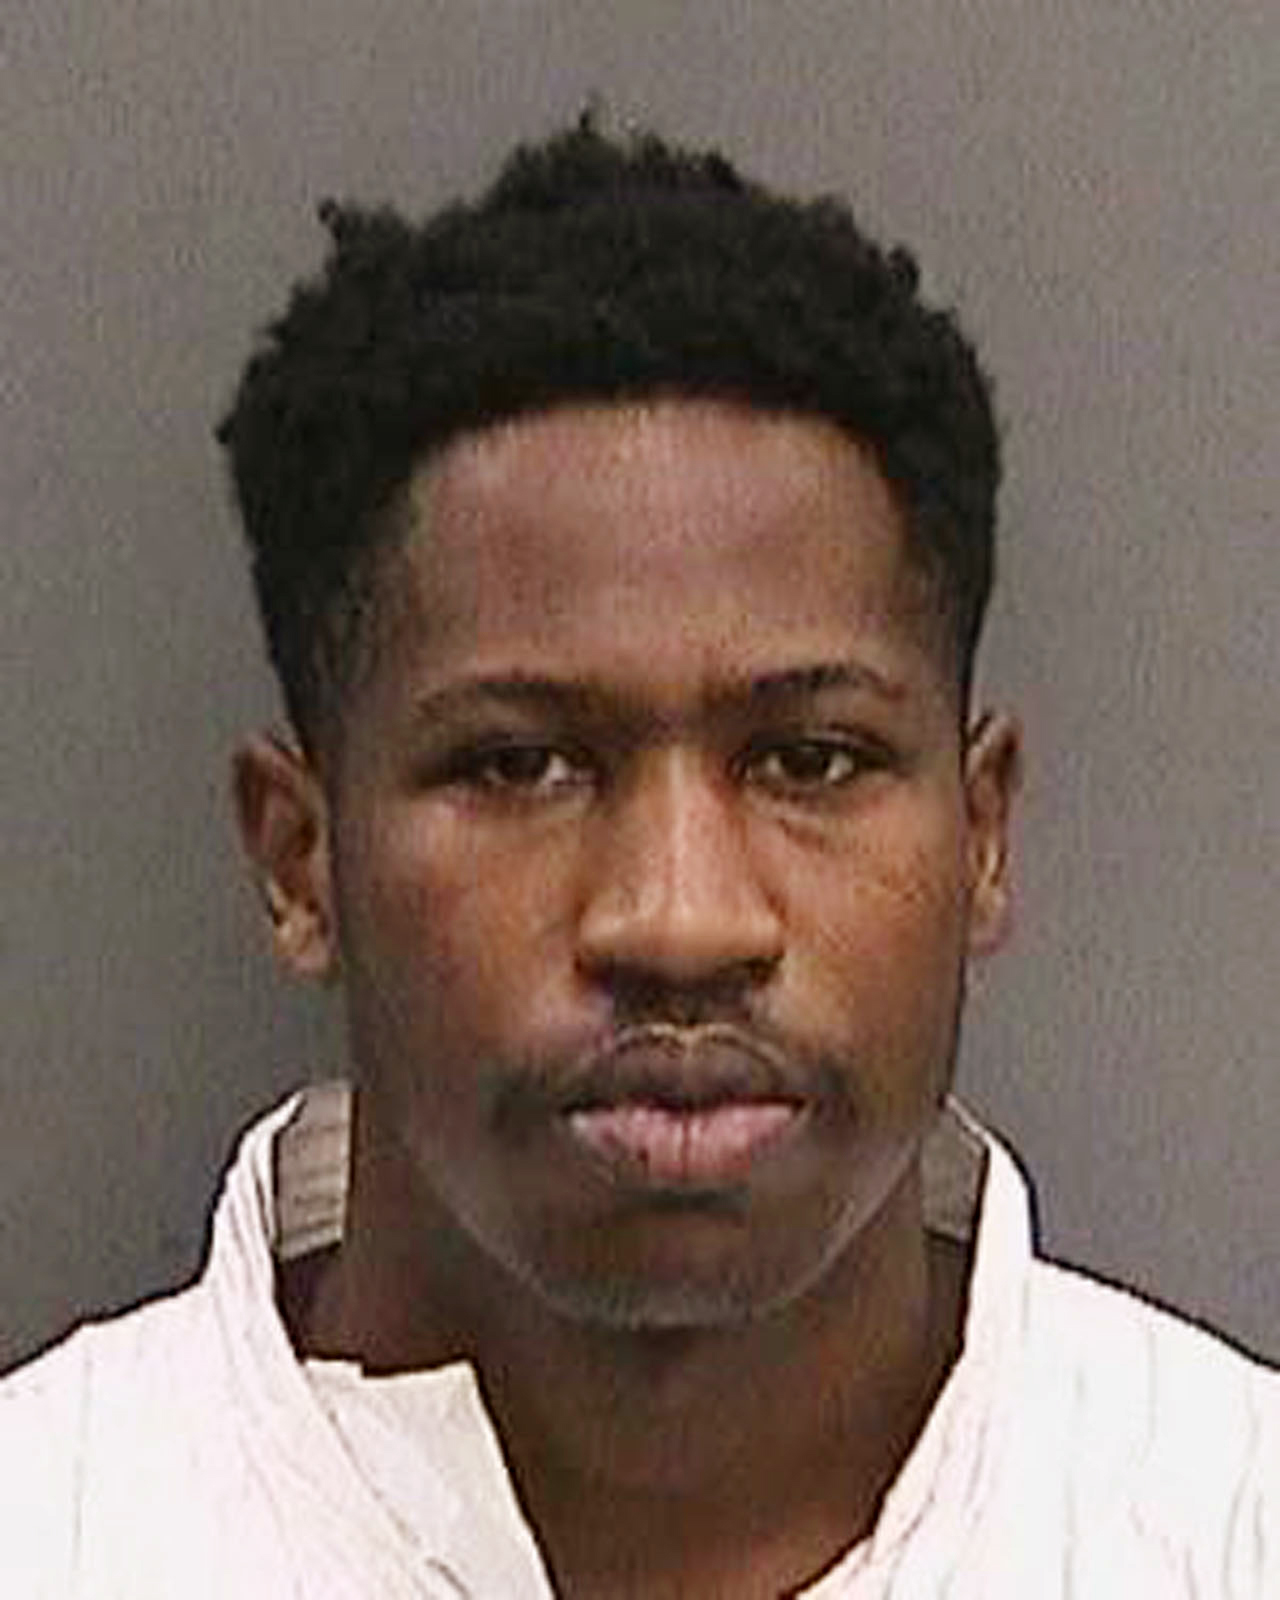 Howell Emanuel Donaldson, the suspect in four slayings that terrorized a Tampa neighborhood, was arrested after he brought a loaded gun to his job at a McDonald's and asked a co-worker to hold it (Tampa Police Department/AP)